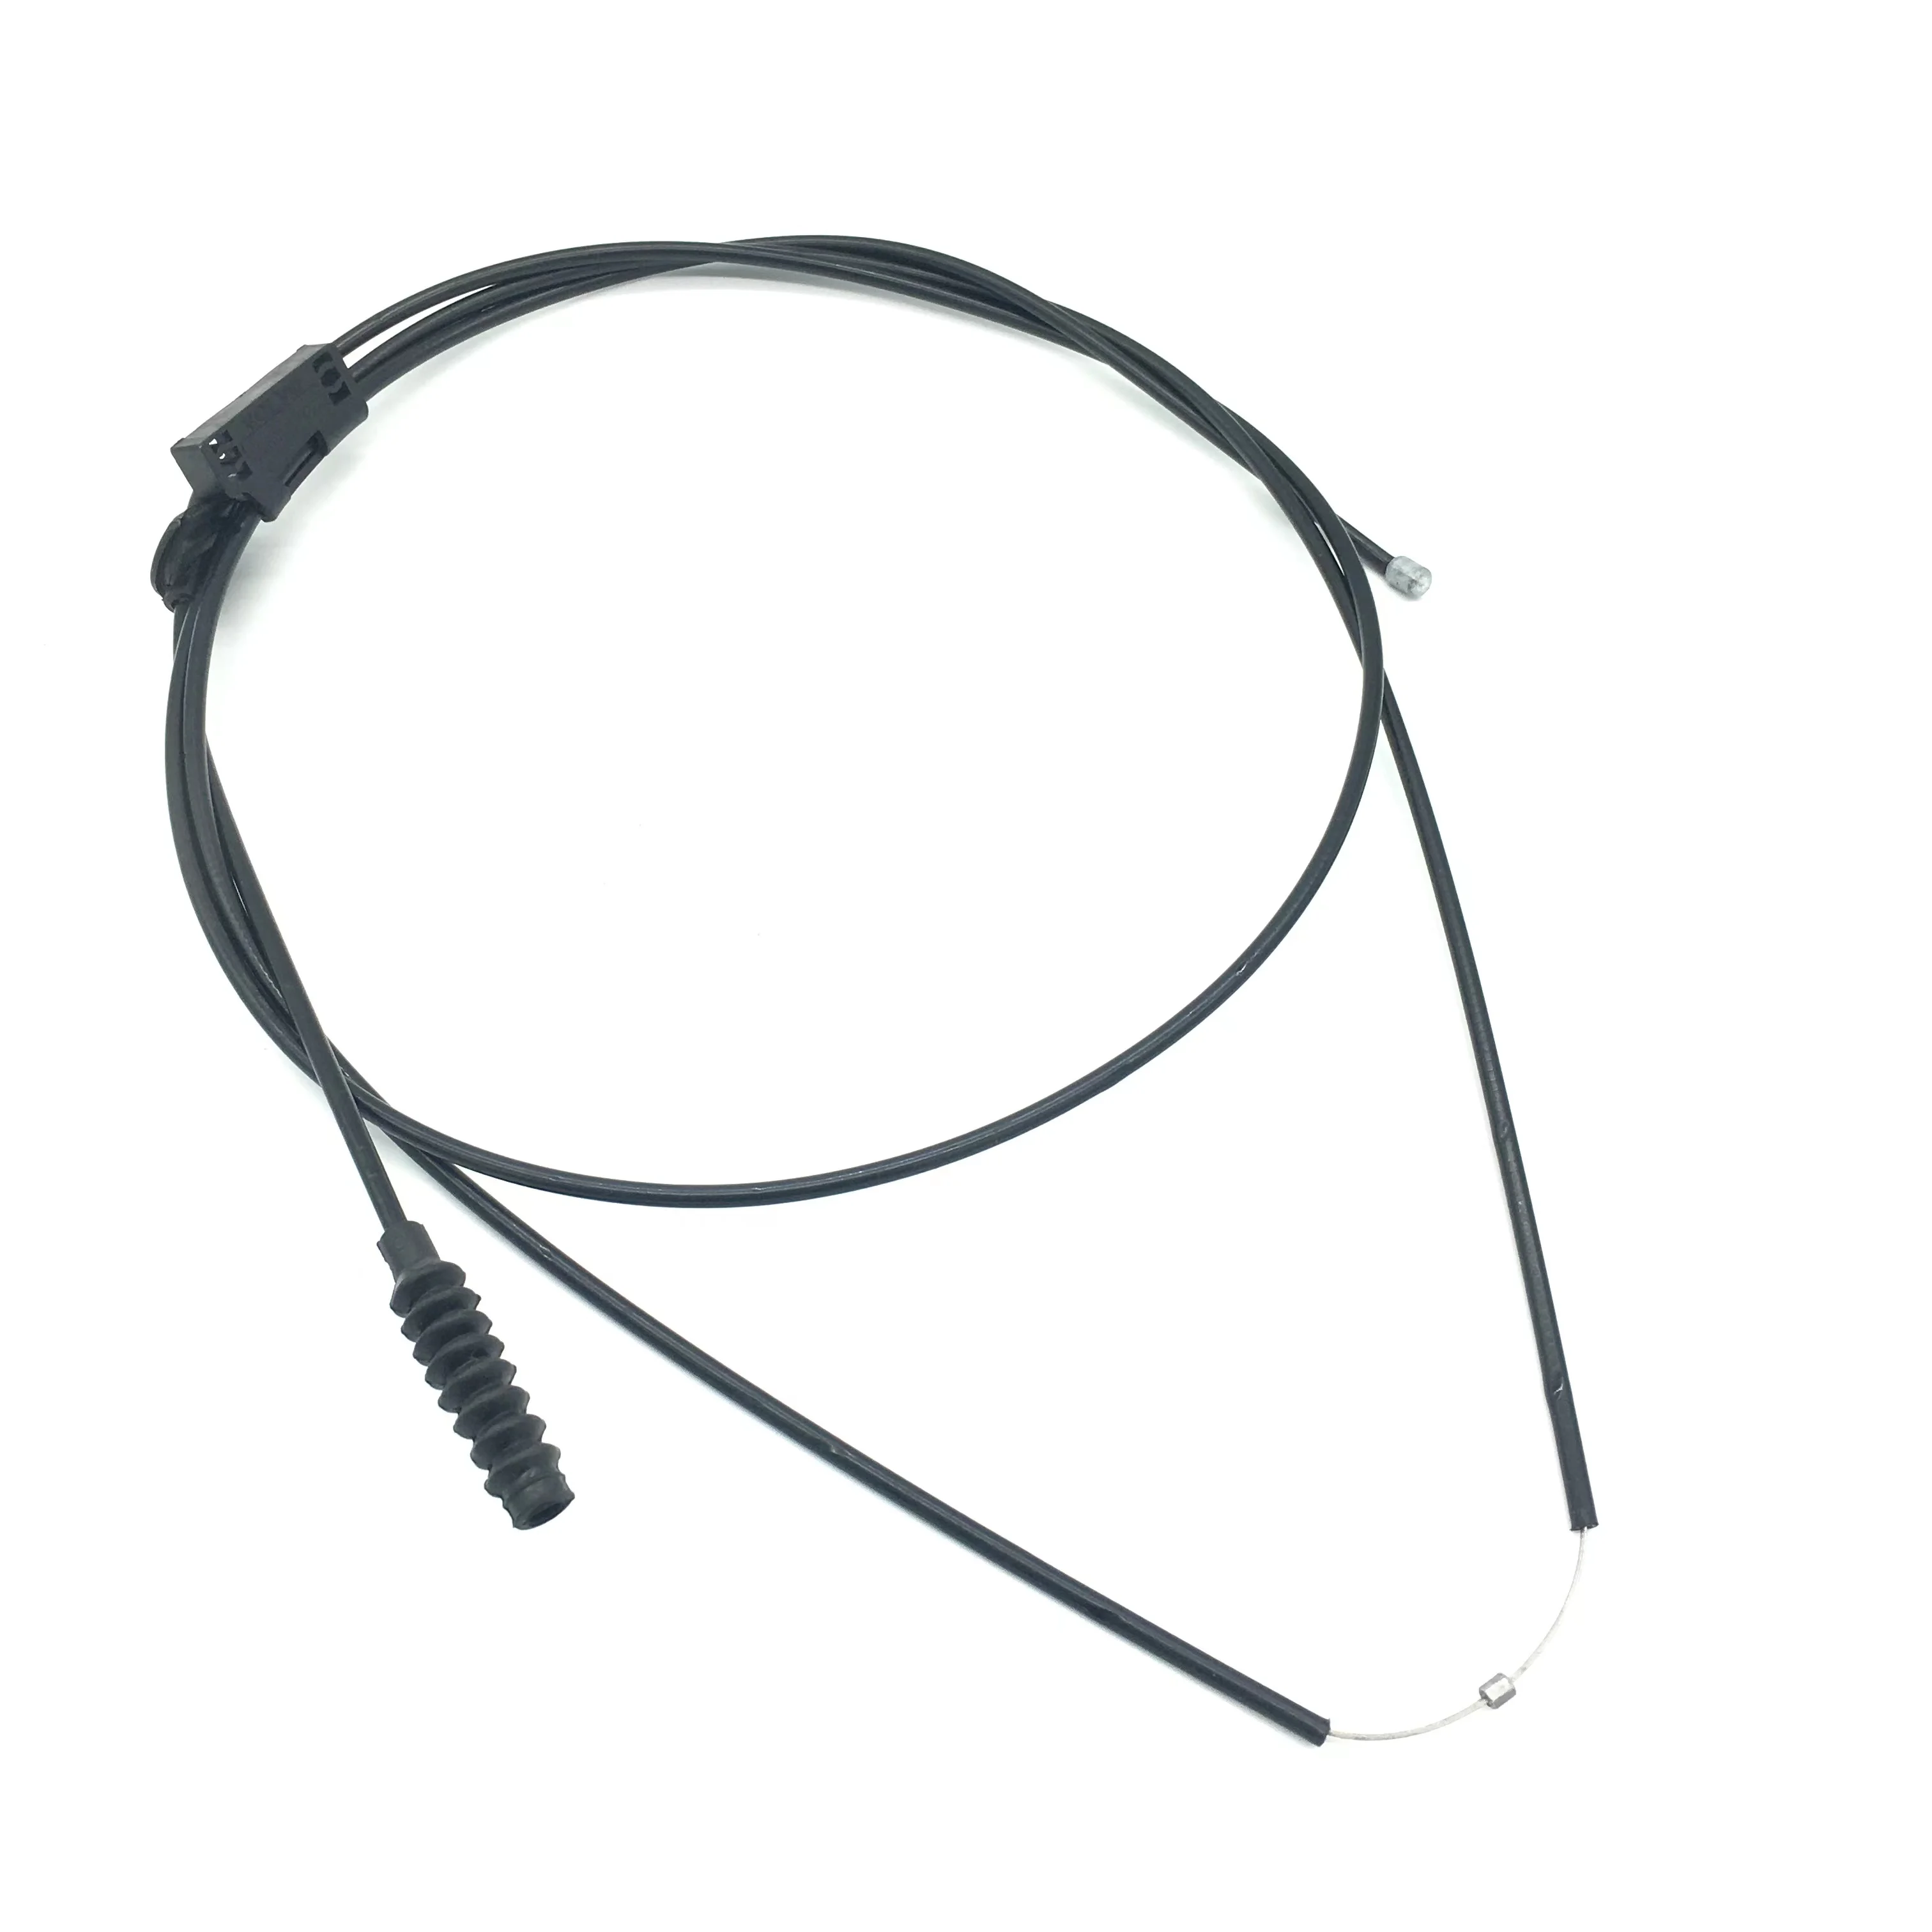 31297545 30671768 9483814 9483770 Automobile Engine Hood Release Cable Cover Cable For S80 V70 XC70 XC90 XC60